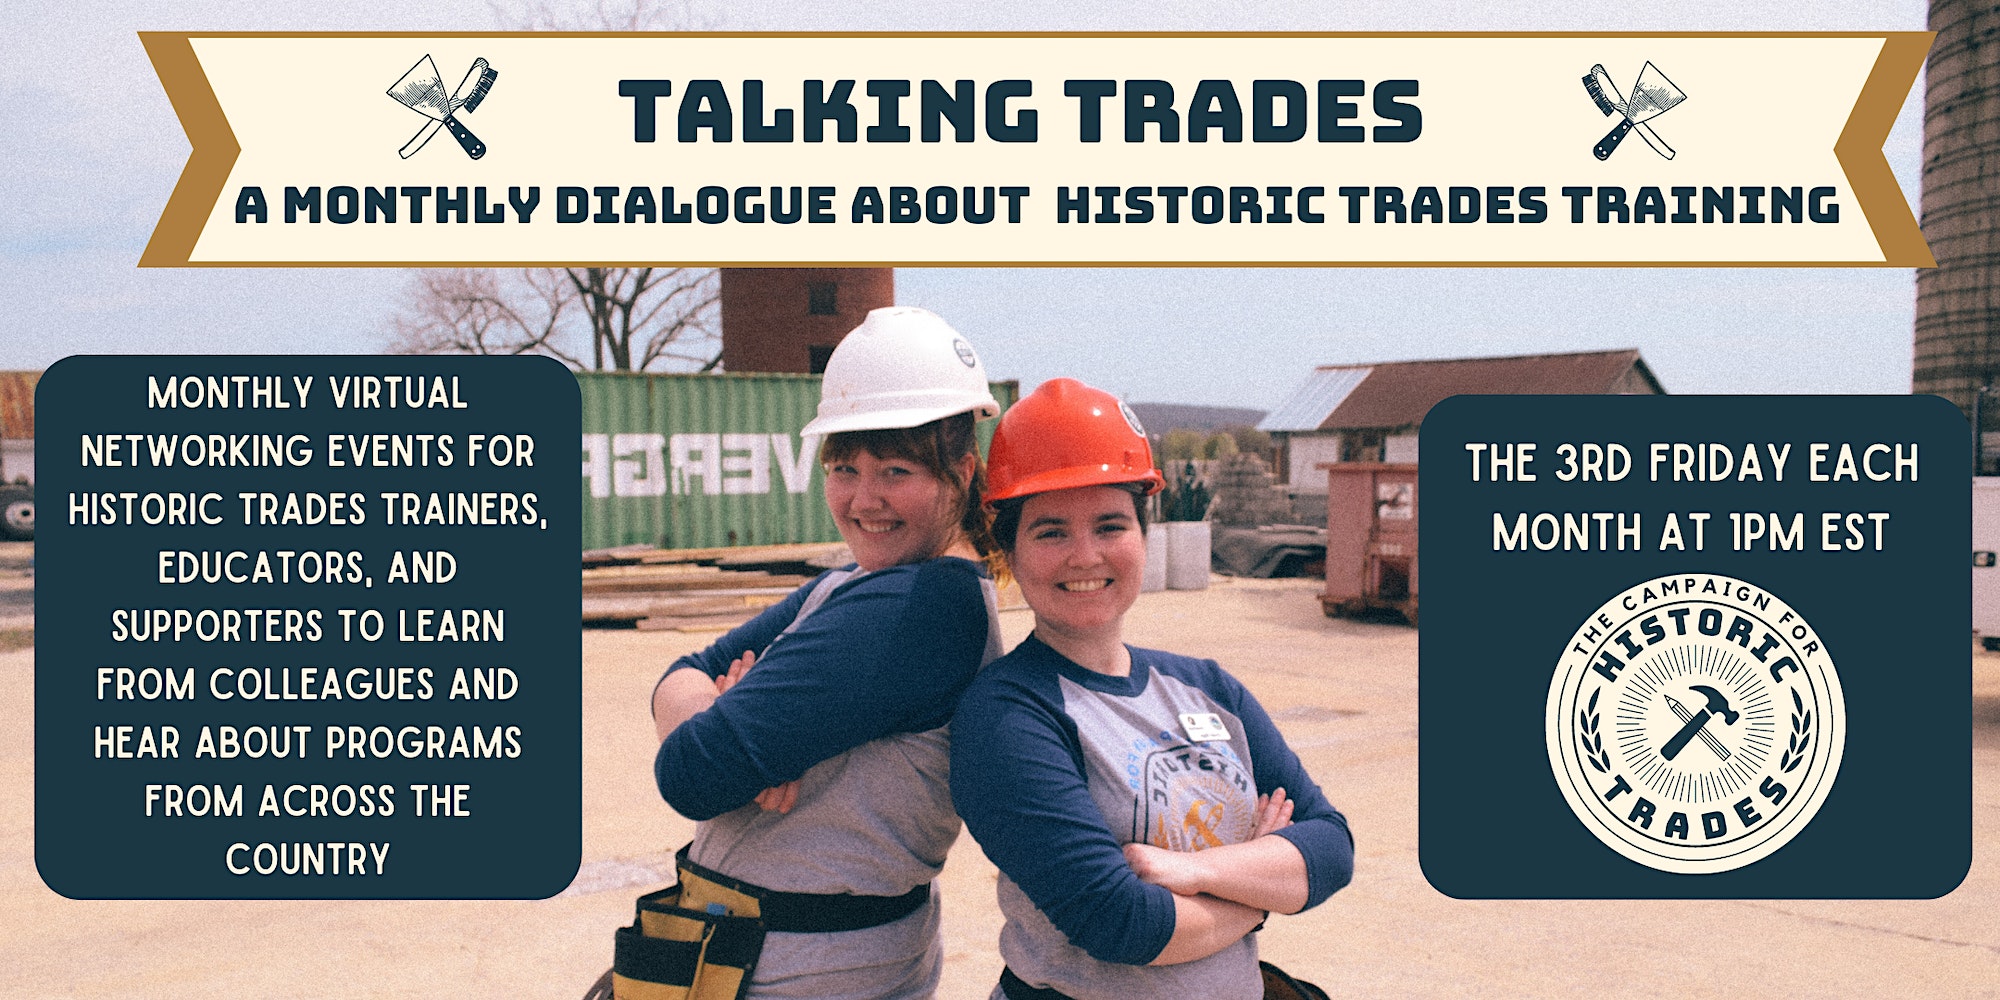 Talking Trades advertisement featuring two tradespeople in hardhats posing back-to-back.